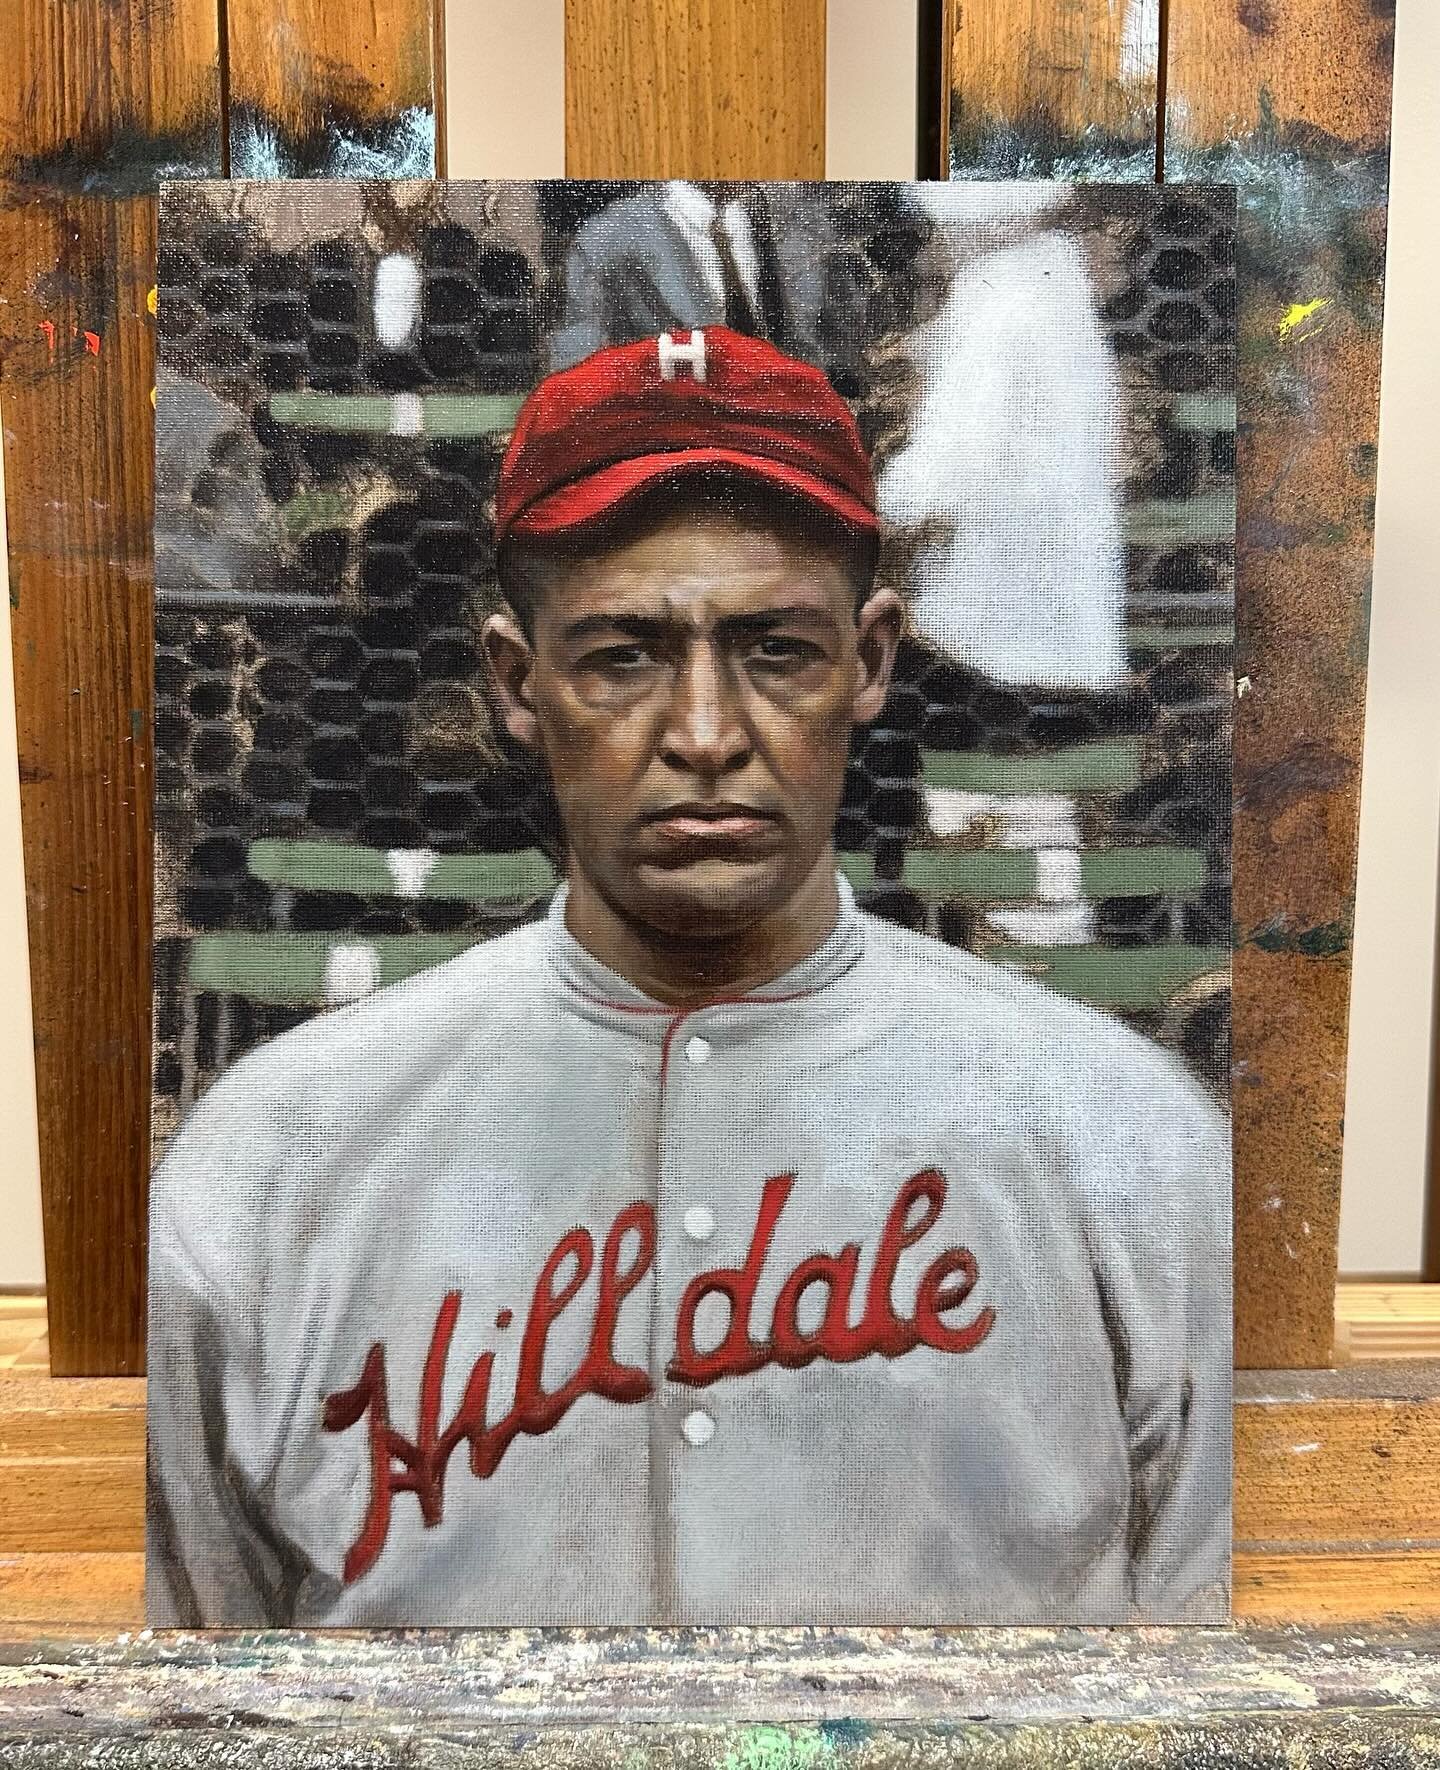 More work on Louis Santop, who was one of the premier sluggers of the Deadball Era. Also happened to be one hell of a catcher. Here he is with Hilldale in 1924, and despite the heaviness of those bags under his eyes, he&rsquo;s just 34-years-old.

#b